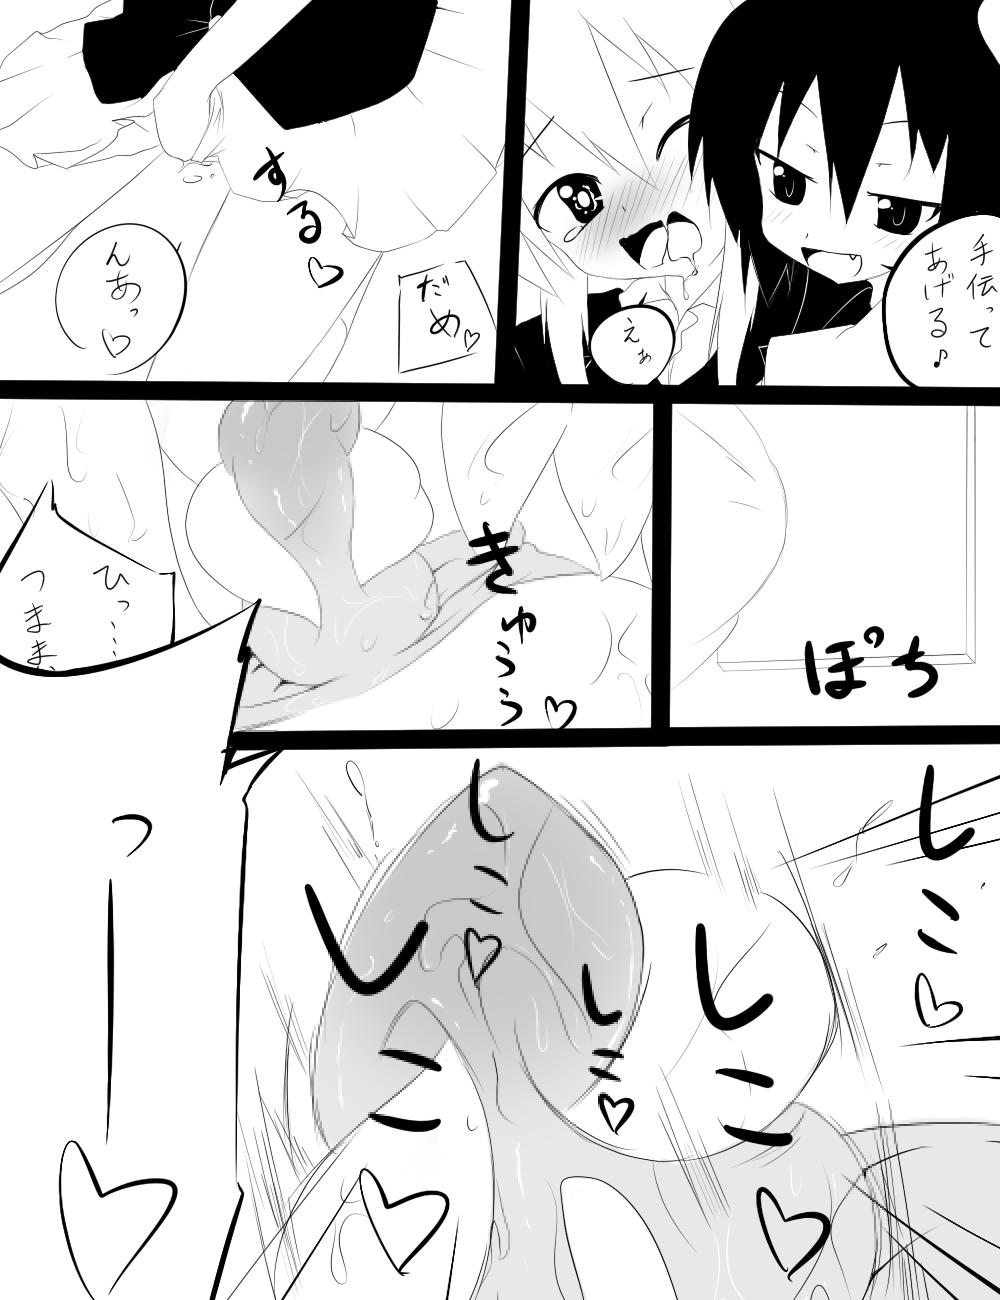 Young Petite Porn 因幡ﾀﾀﾞ同人第三弾完成　「永遠亭触　うどんげ編」 - Touhou project Lesbian - Page 11